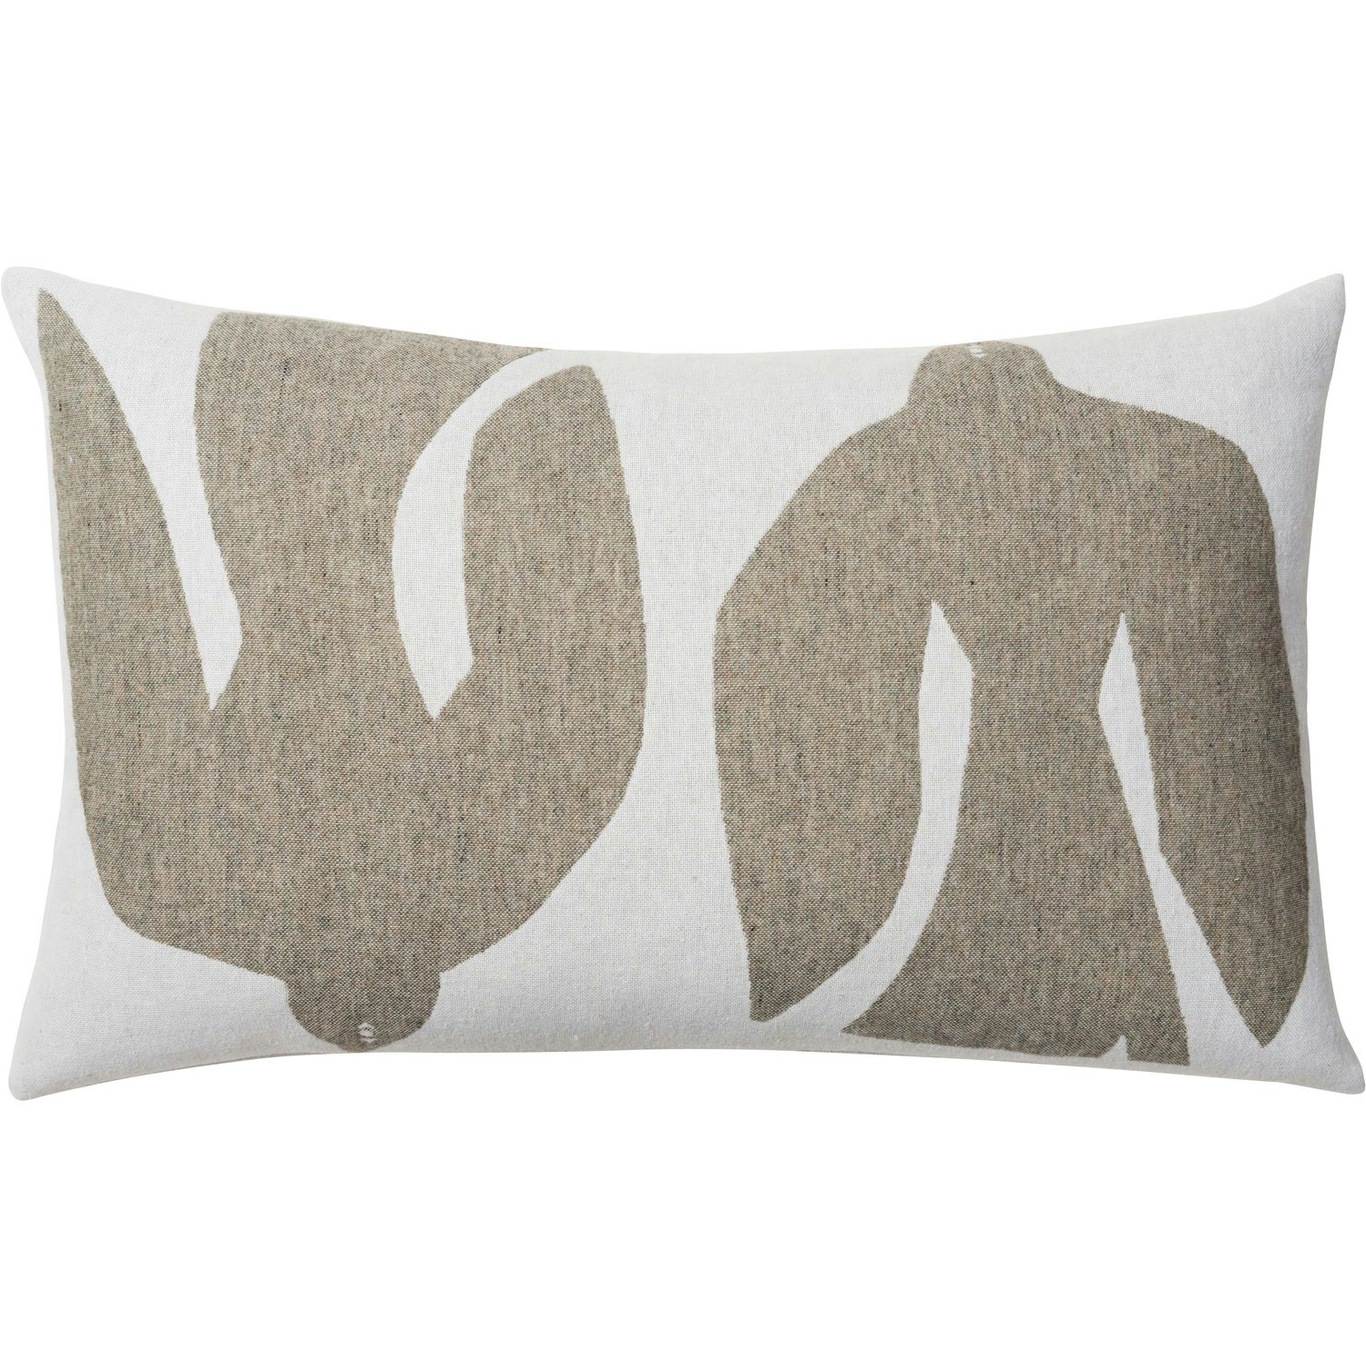 Early Bird Cushion Cover 40x60 cm, Olive